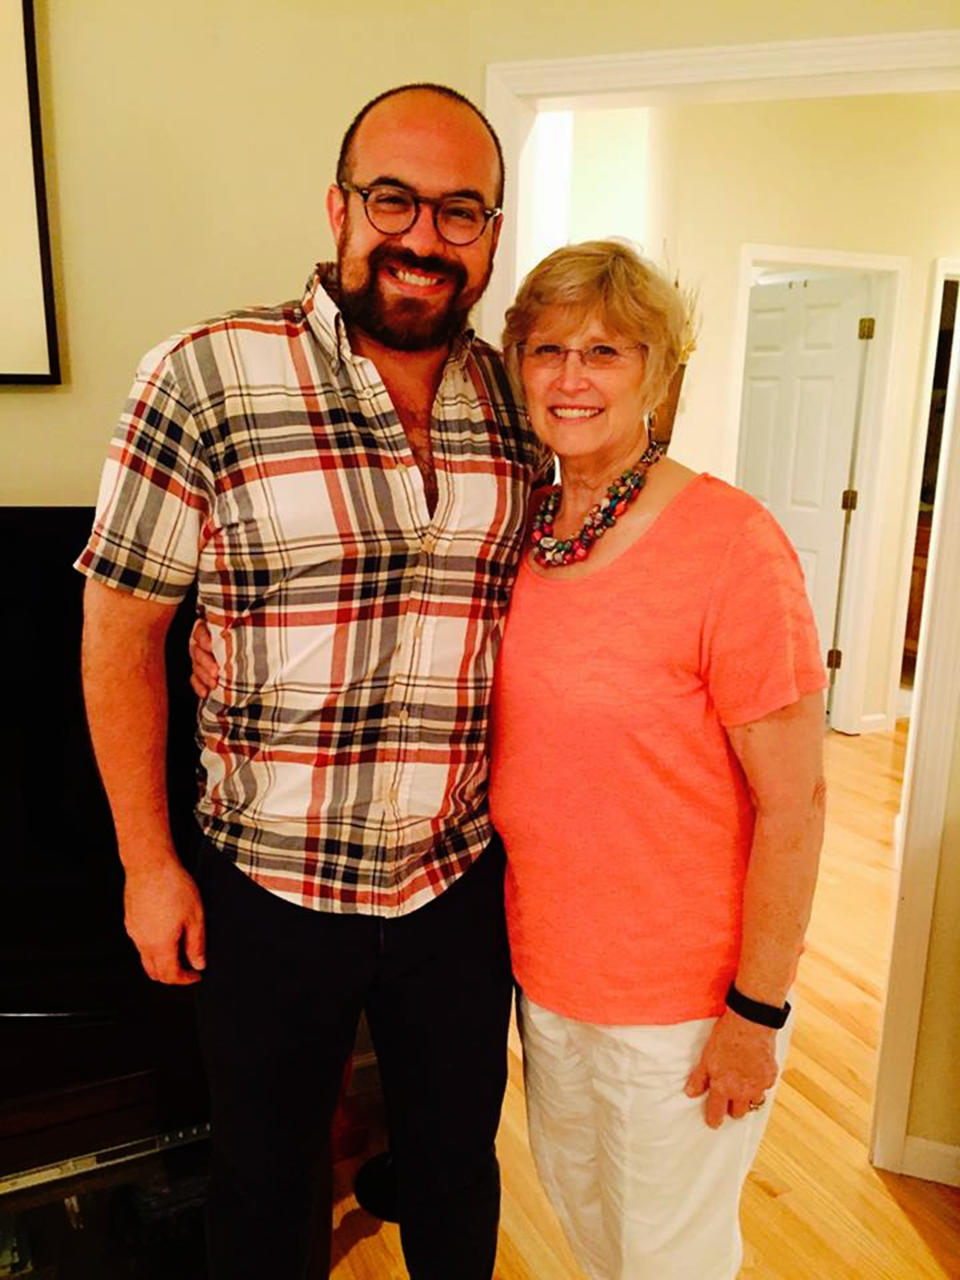 &ldquo;Judy and I met nearly six years ago as coworkers who turned into very good friends. While there are 40 years between us, our friendship has endured as a result of constant communication, letters, and occasional phone call pick-me-ups.&rdquo; -- Michael